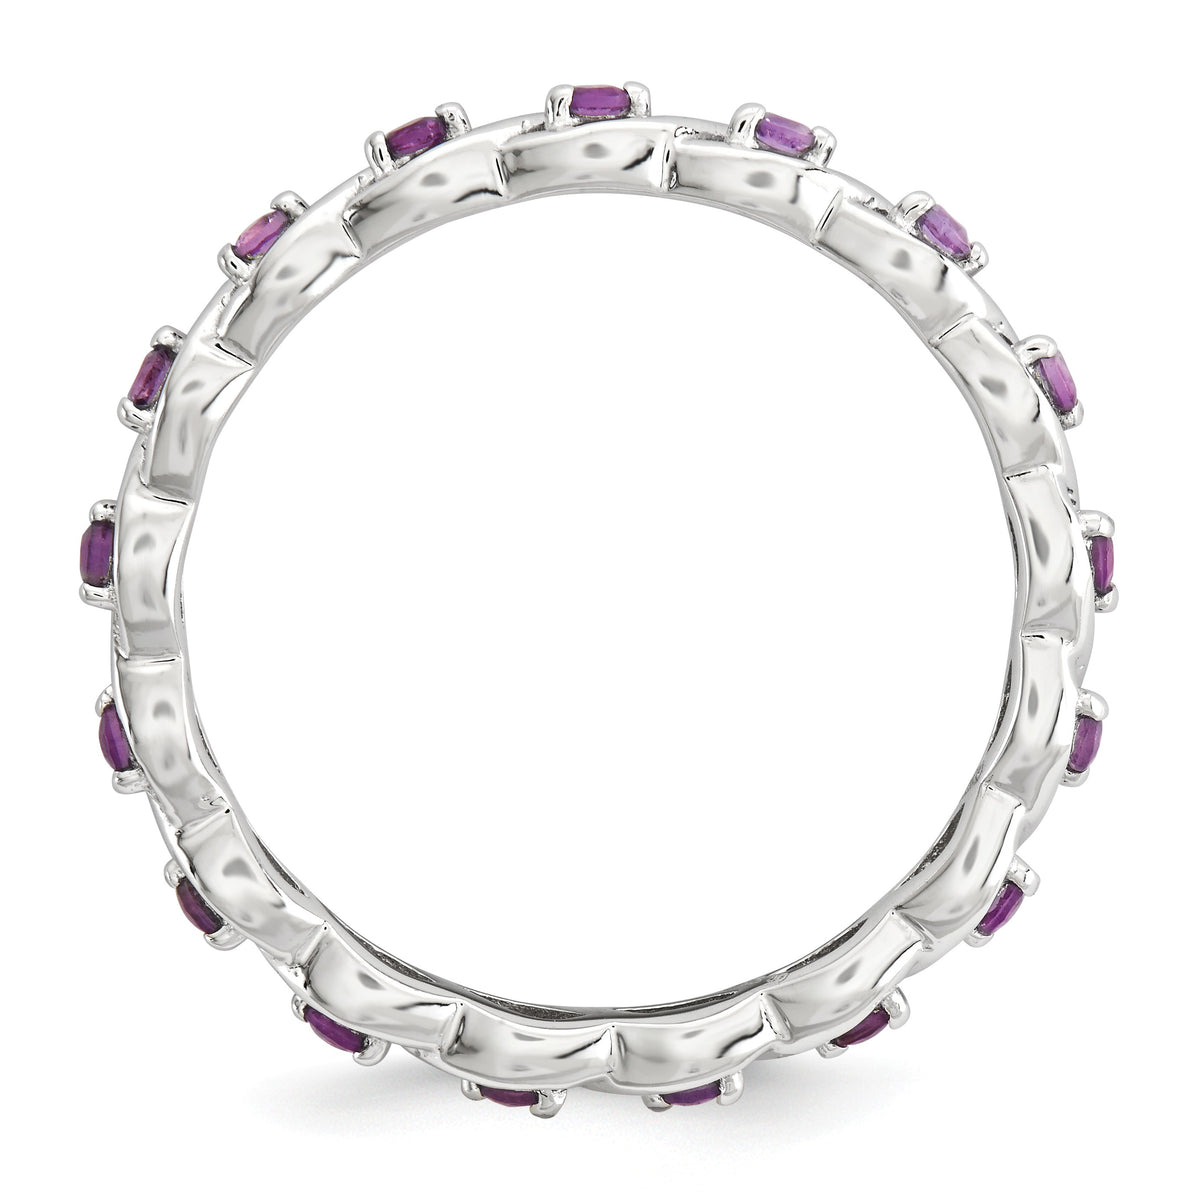 Alternate view of the 2.5mm Rhodium Plated Sterling Silver Stackable Amethyst Twist Band by The Black Bow Jewelry Co.